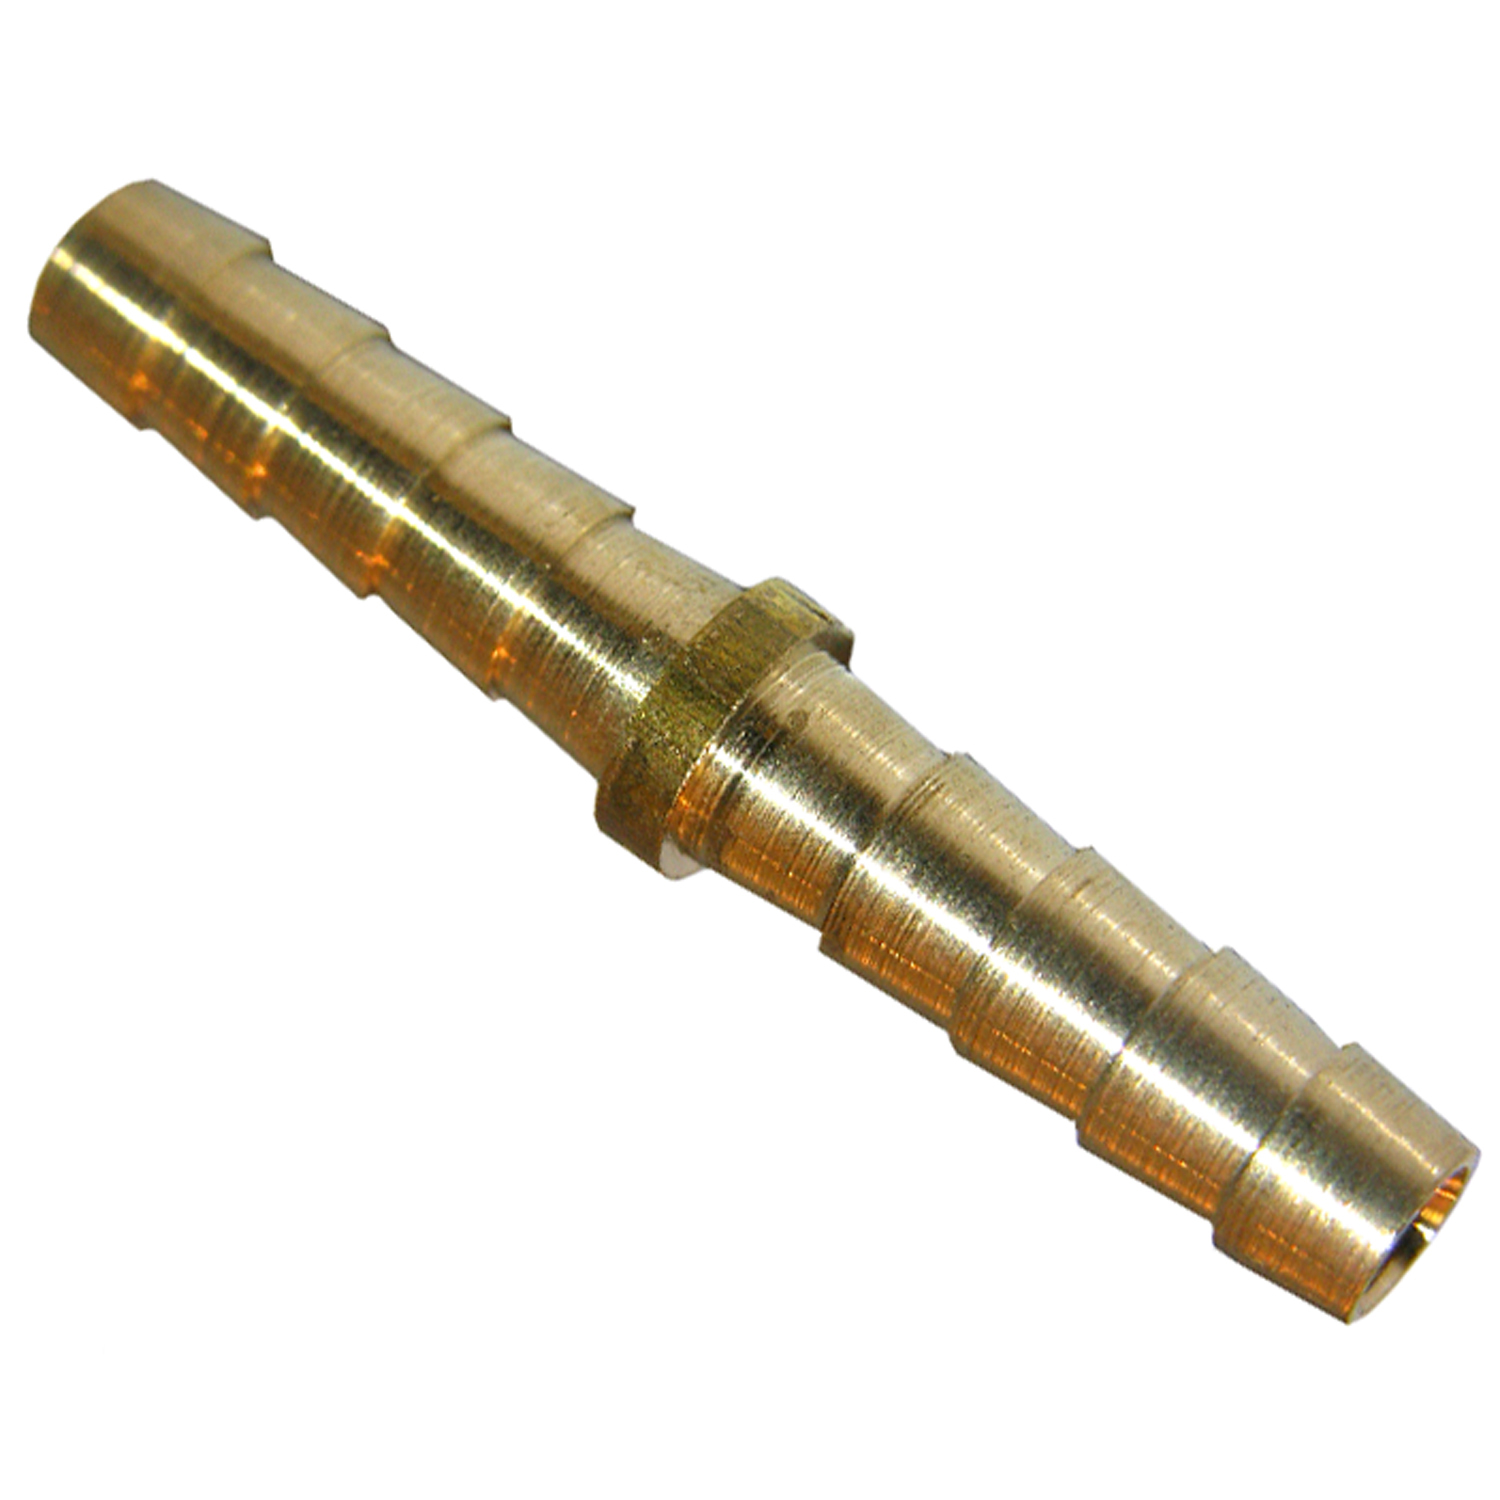 17-7511 Coupling, 1/4 in, Barb, Brass